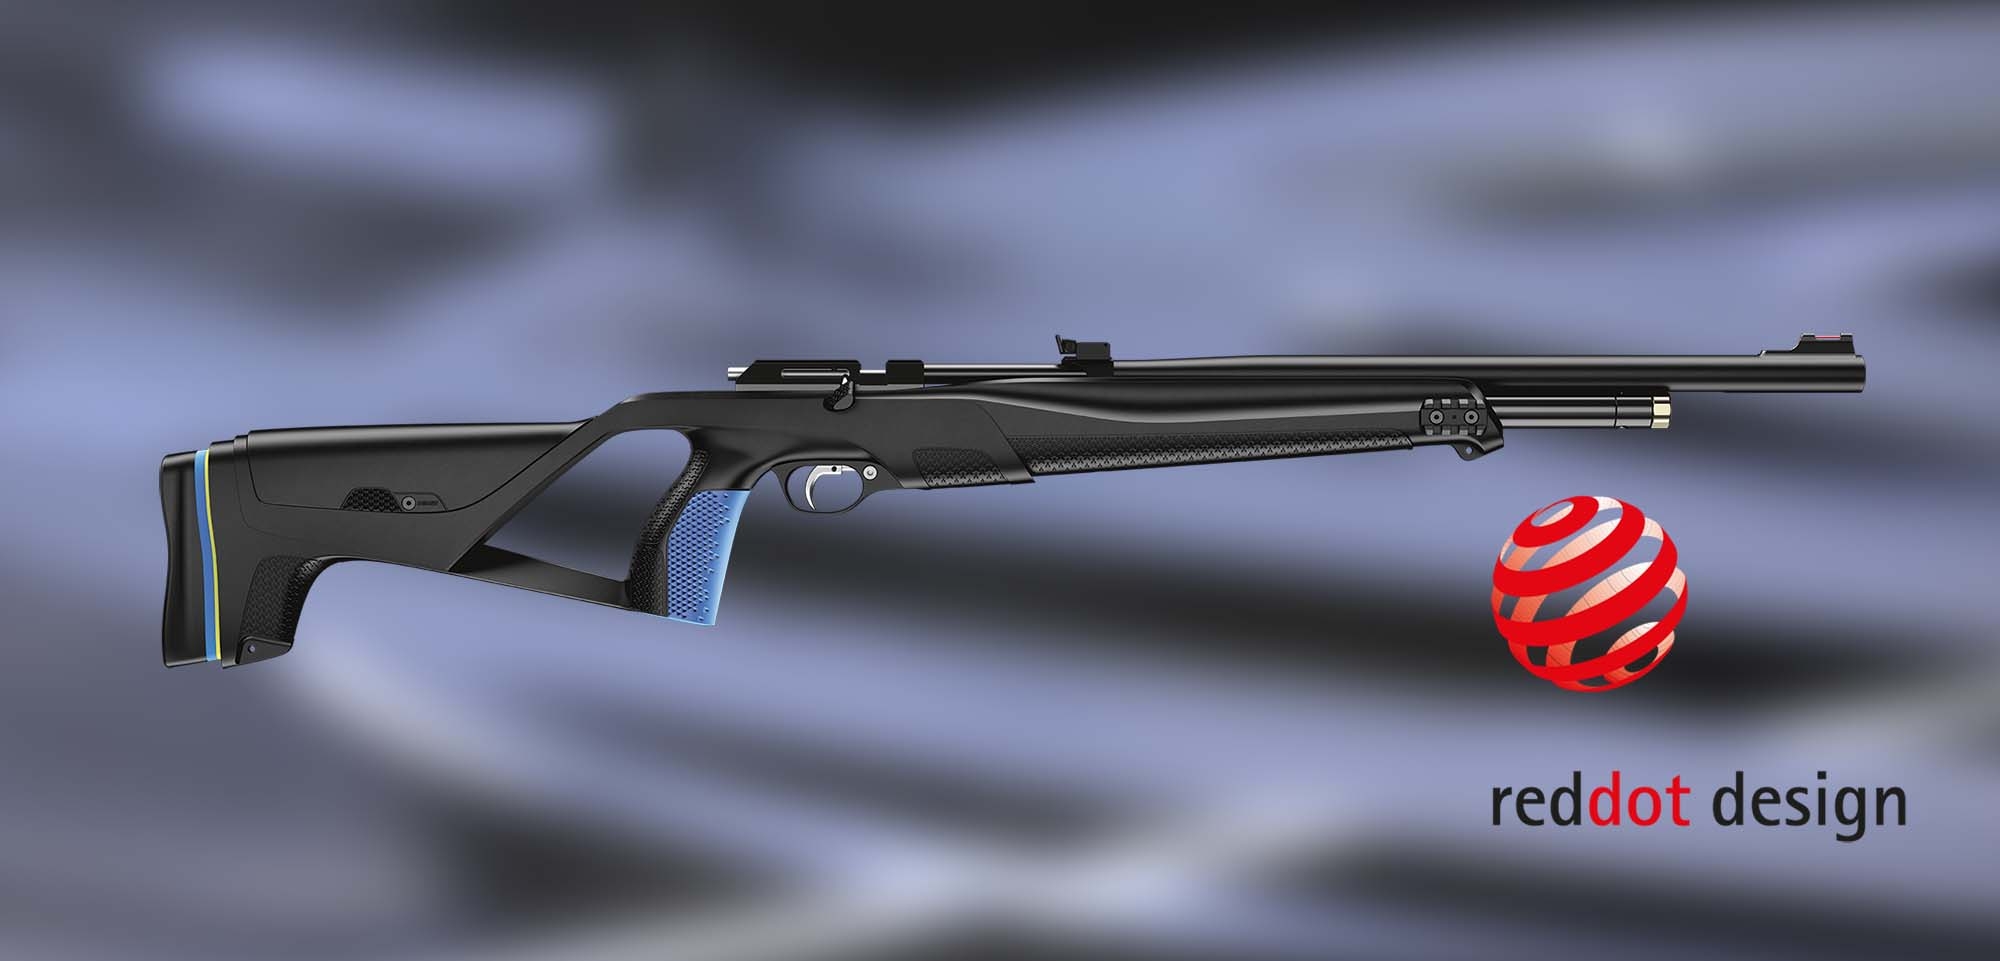 Reviewed: Stoeger XM1 .22 PCP Air Rifle